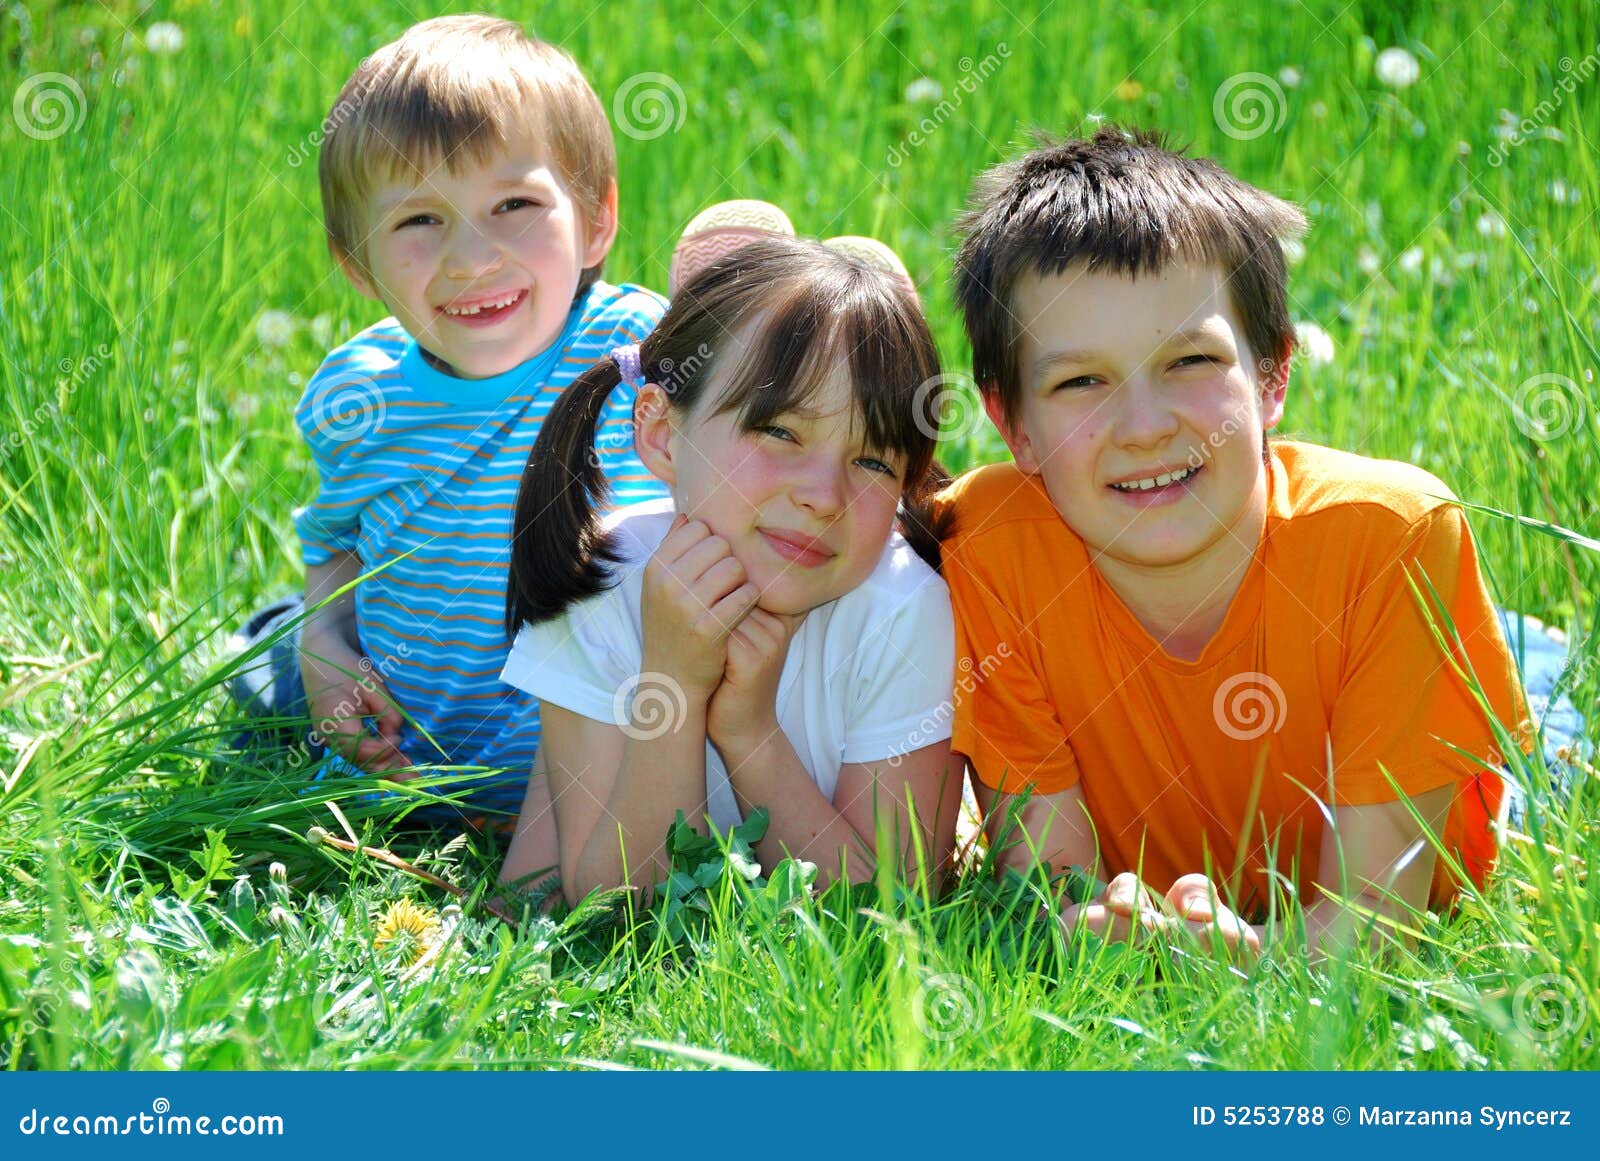 Children in the Grass stock photo. Image of park, leisure - 5253788